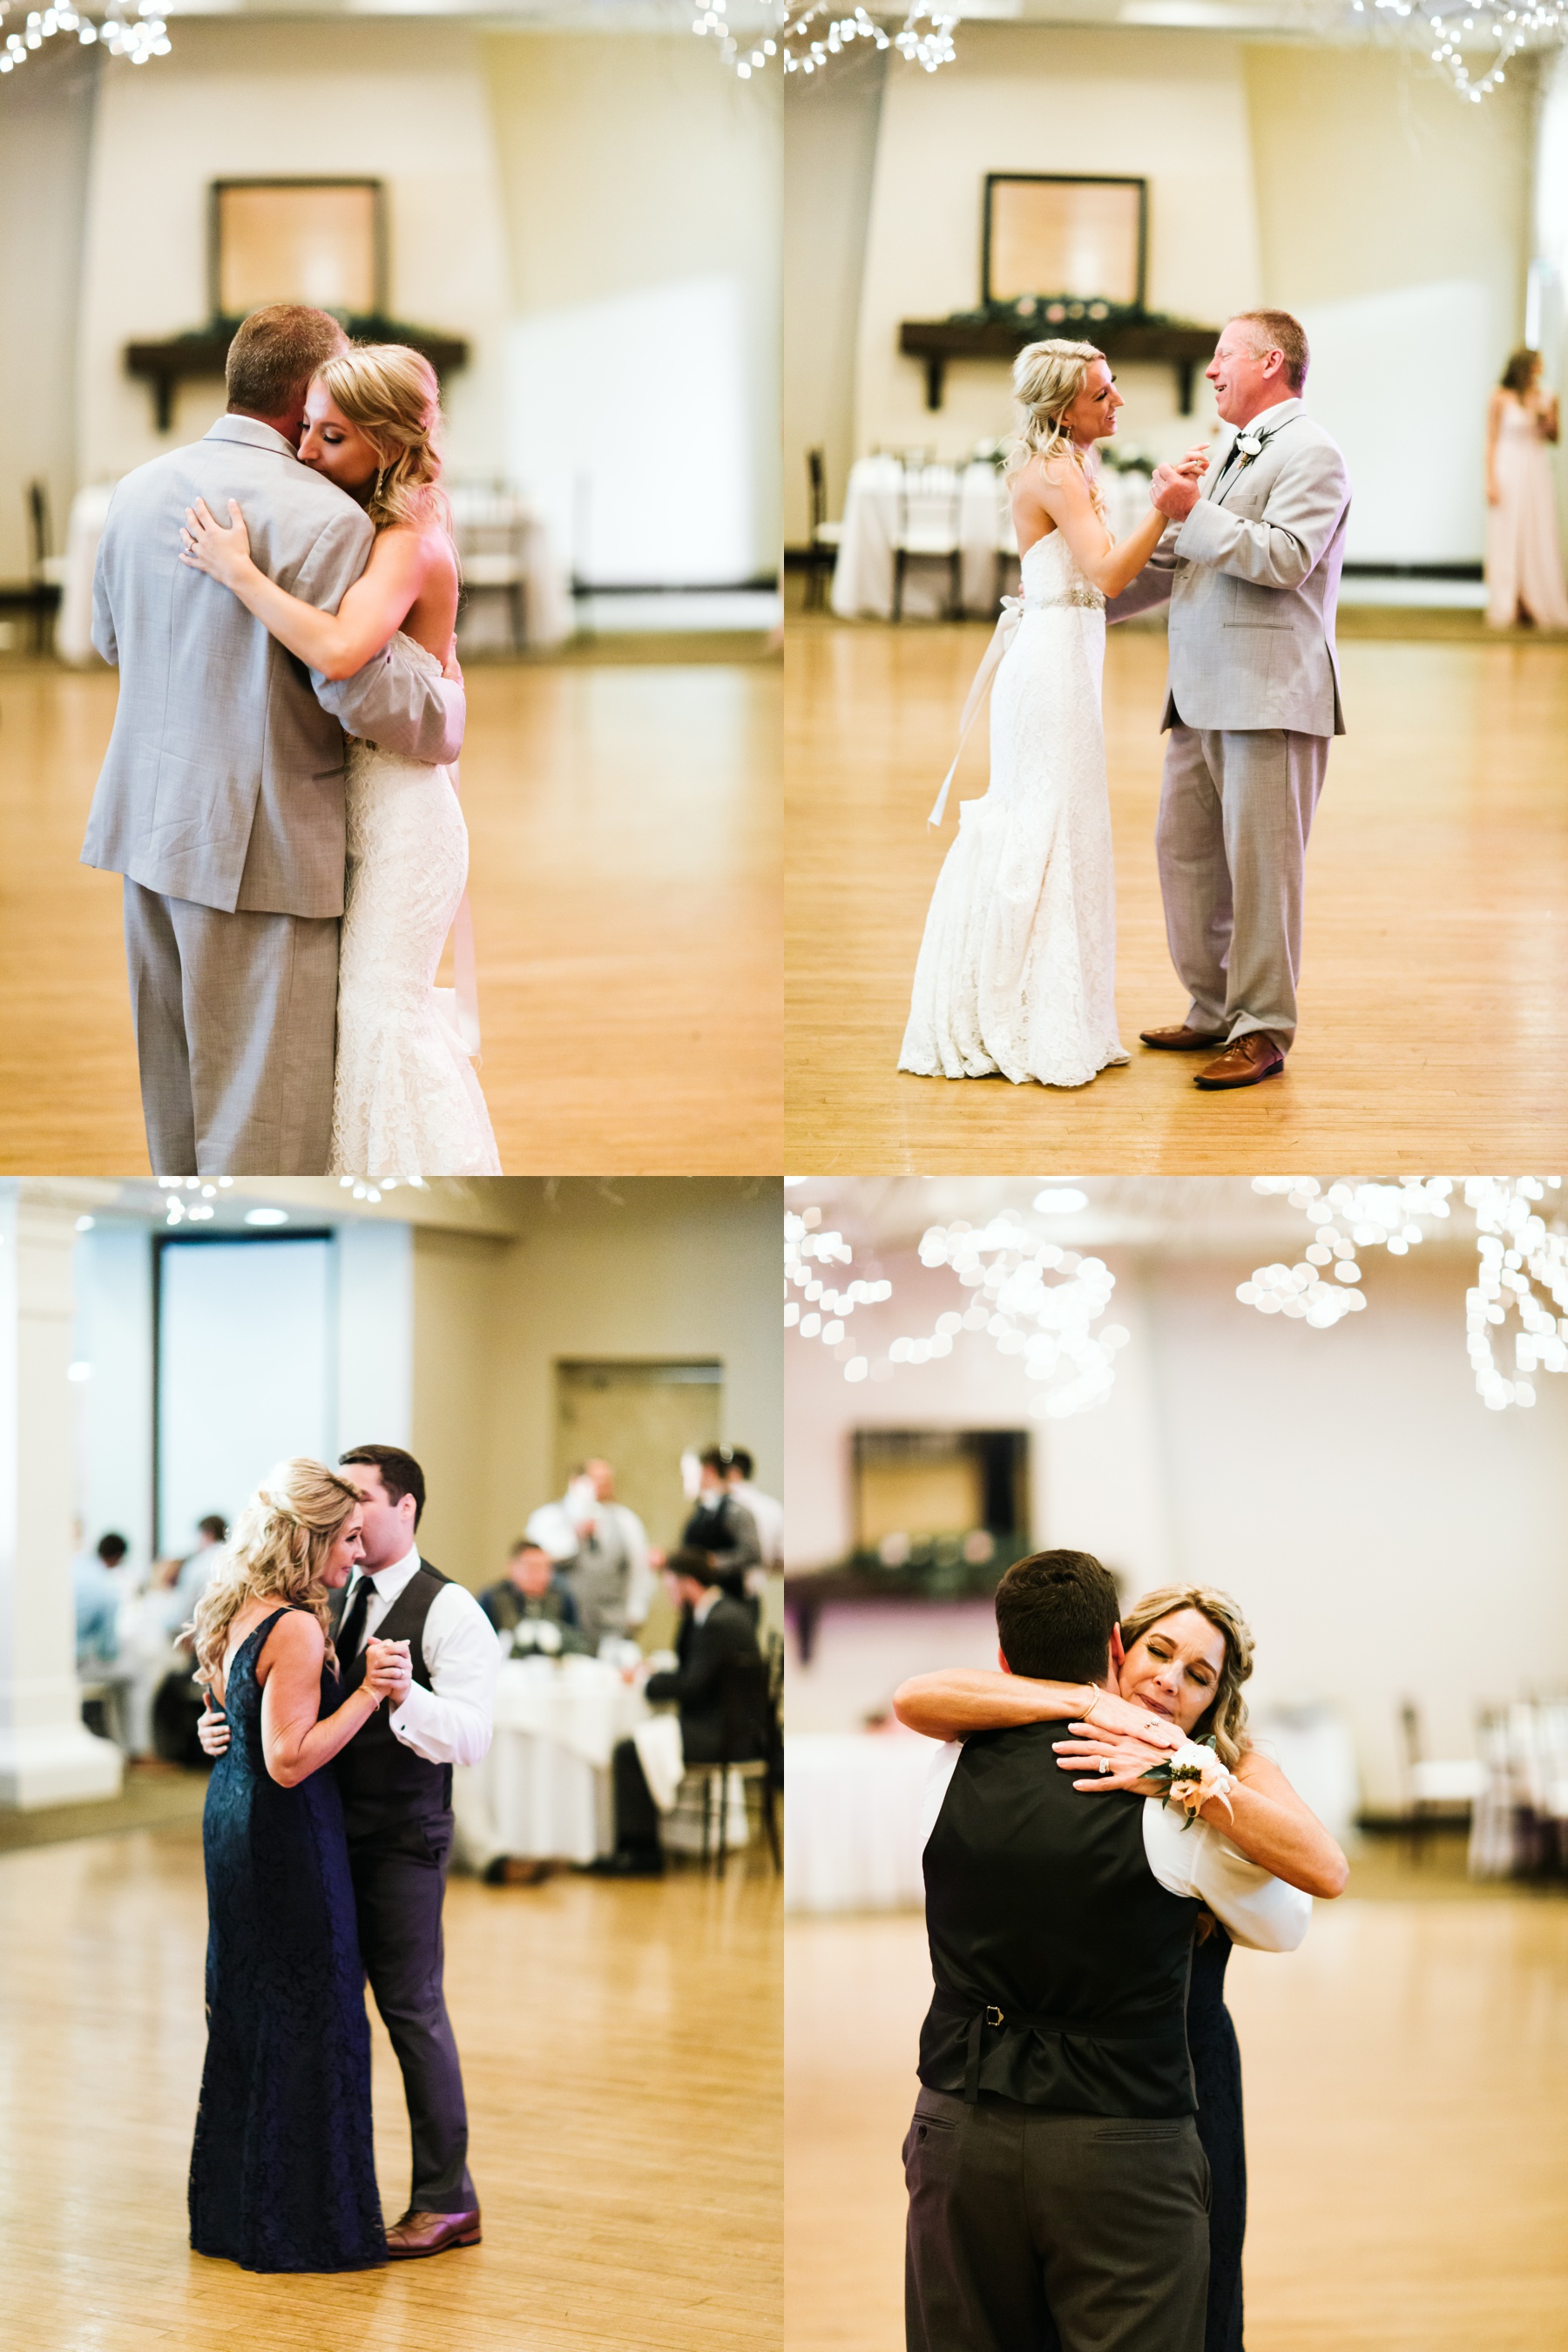 A bride and groom sharing their dances with their parents